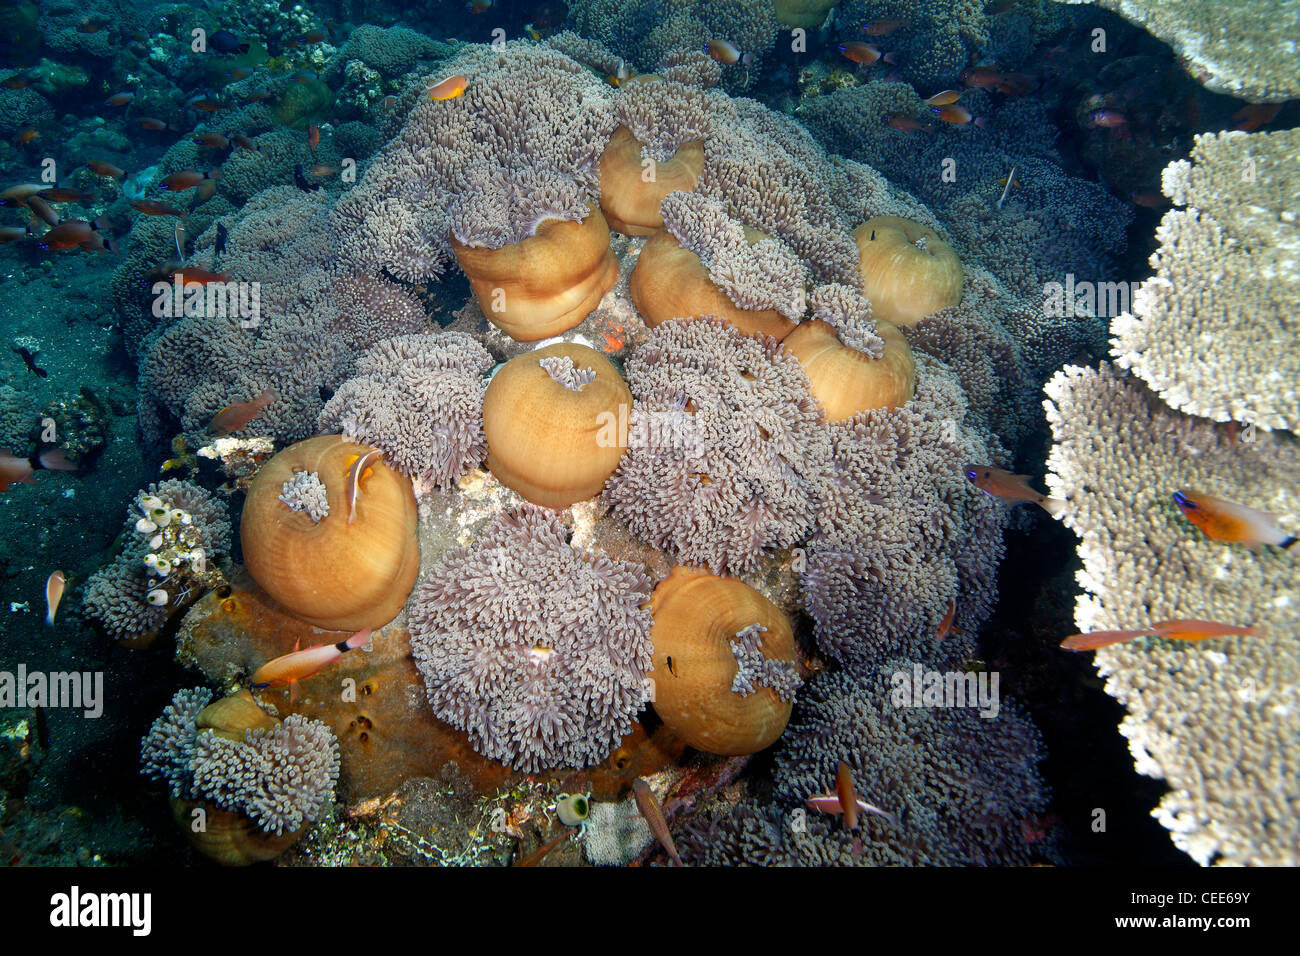 A large patch of Magnificent Sea Anemones, Heteractis magnifica. Some of the anemones are closed, or 'balled'. Stock Photo